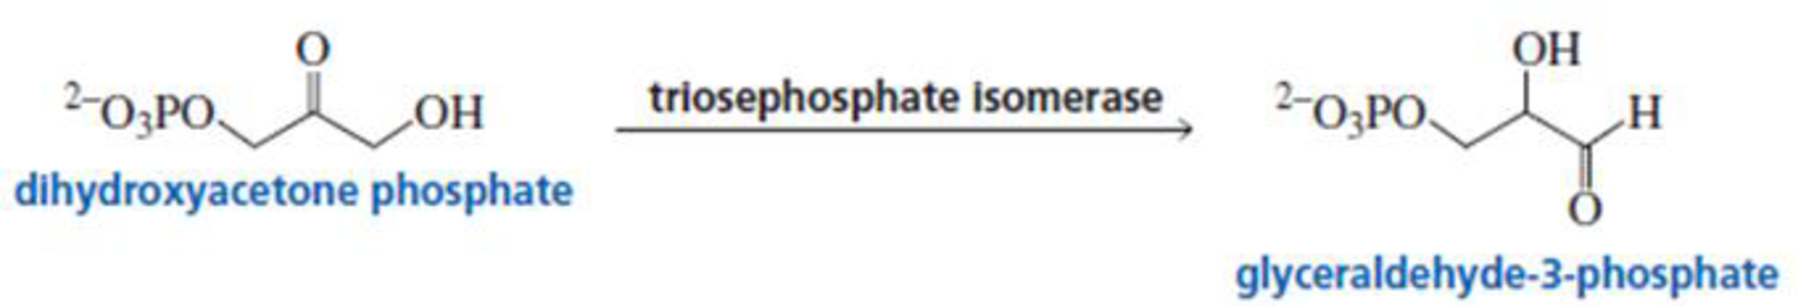 Chapter 18, Problem 40P, Trisephosphate isomerase (TIM) catalyzes the conversion of dihydroxyacetone phosphate to 